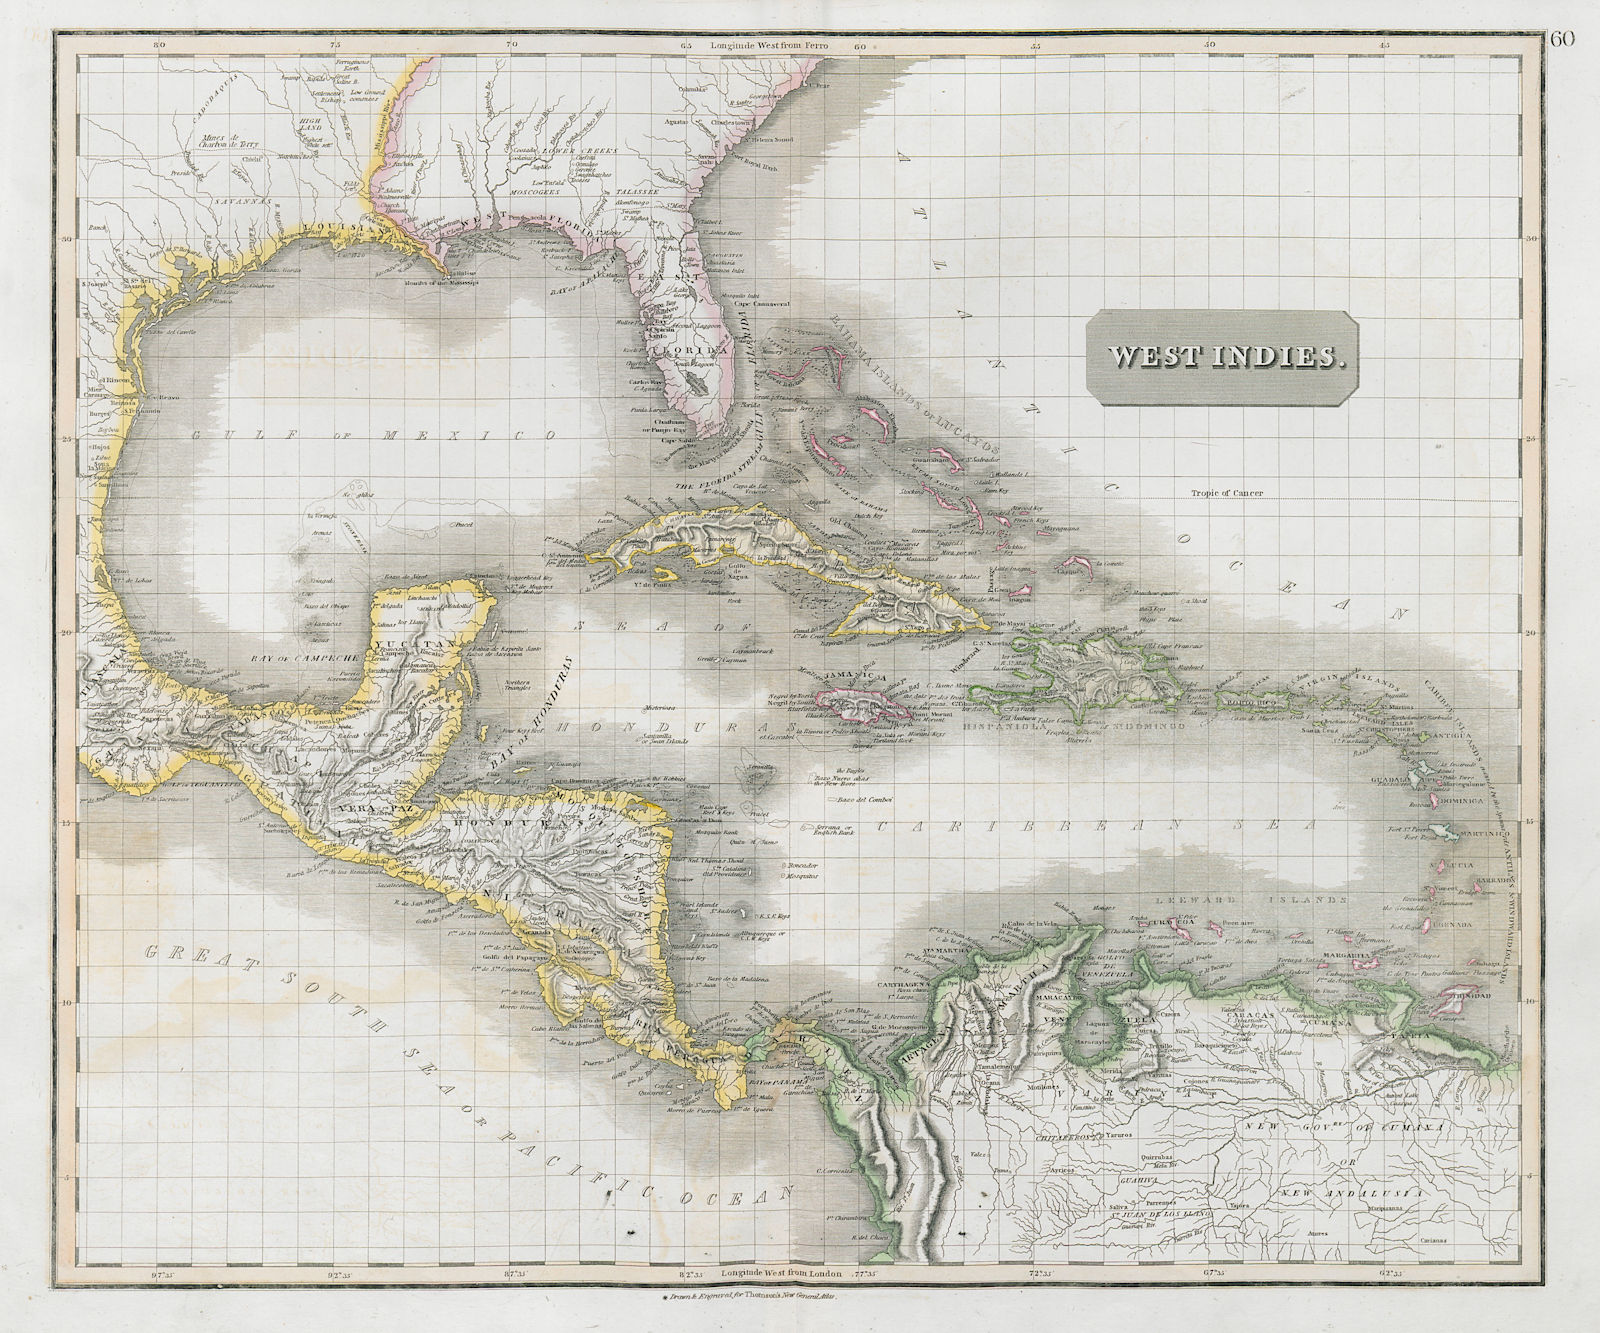 Associate Product West Indies. Caribbean islands Antilles Gulf of Mexico Florida. THOMSON 1830 map